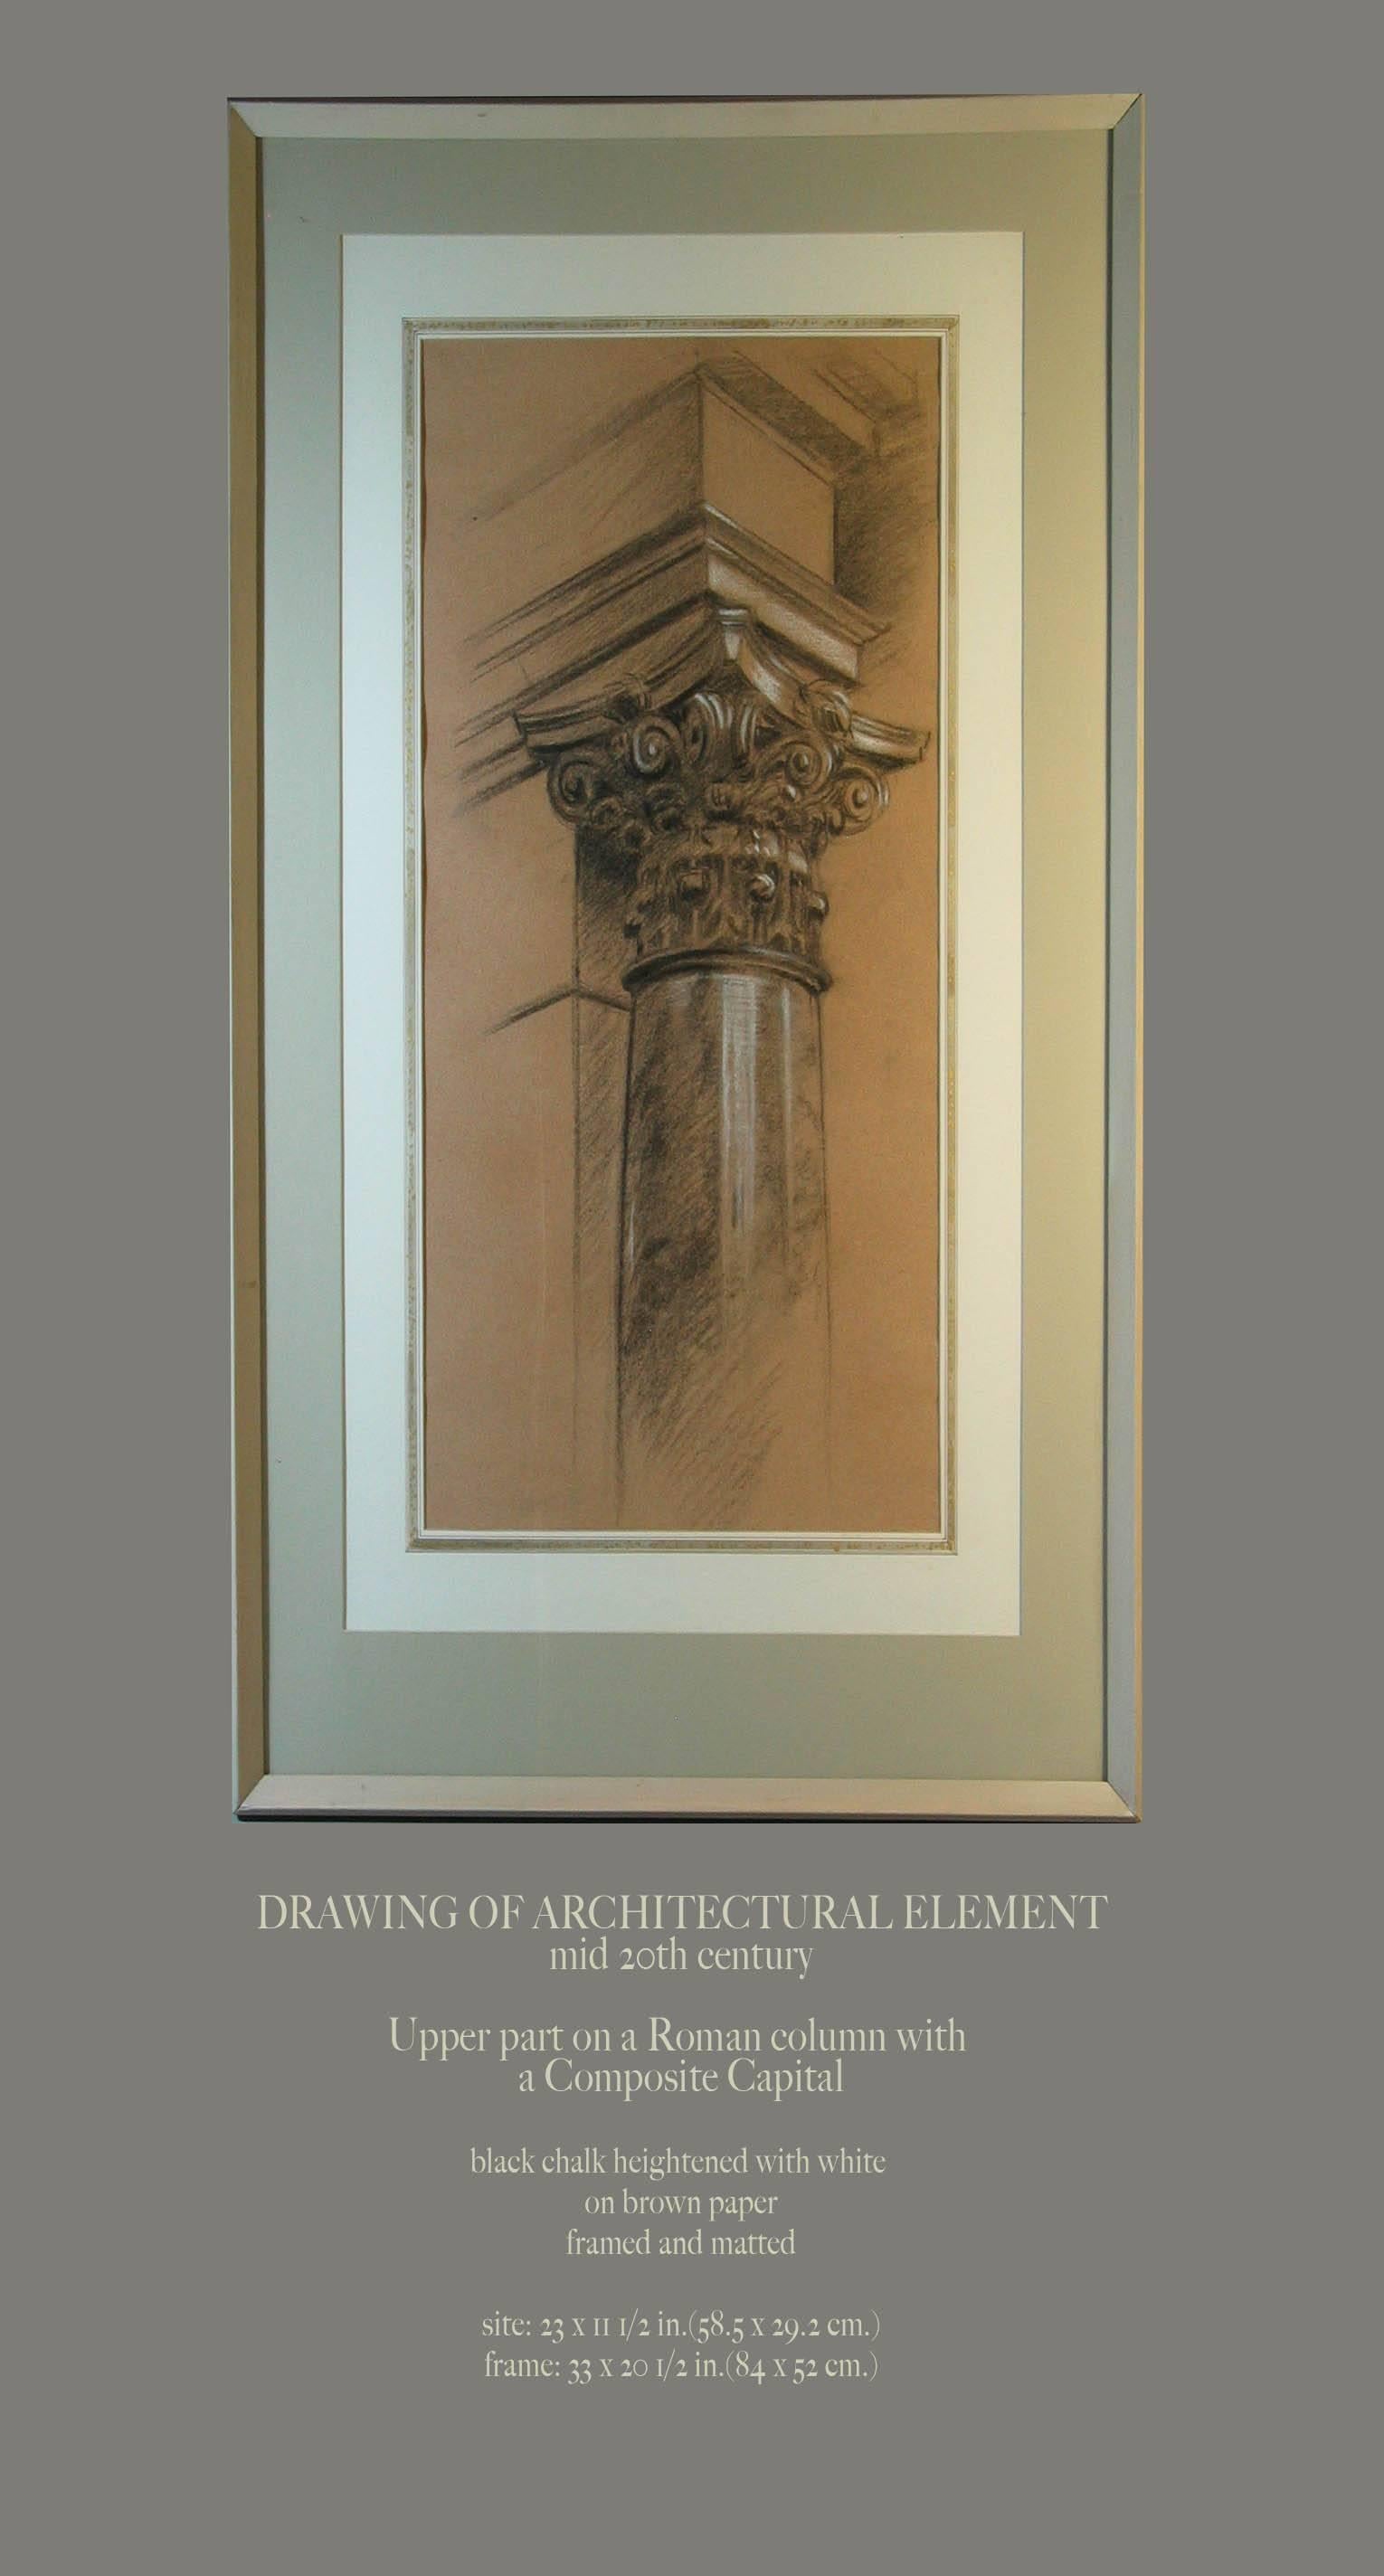 A drawing of Architectural element, mid-20th century, upper part of a Roman column with a Composite Capital. Black chalk heightened with white on brown paper, framed and matted, hand drawn.
Size measures 23